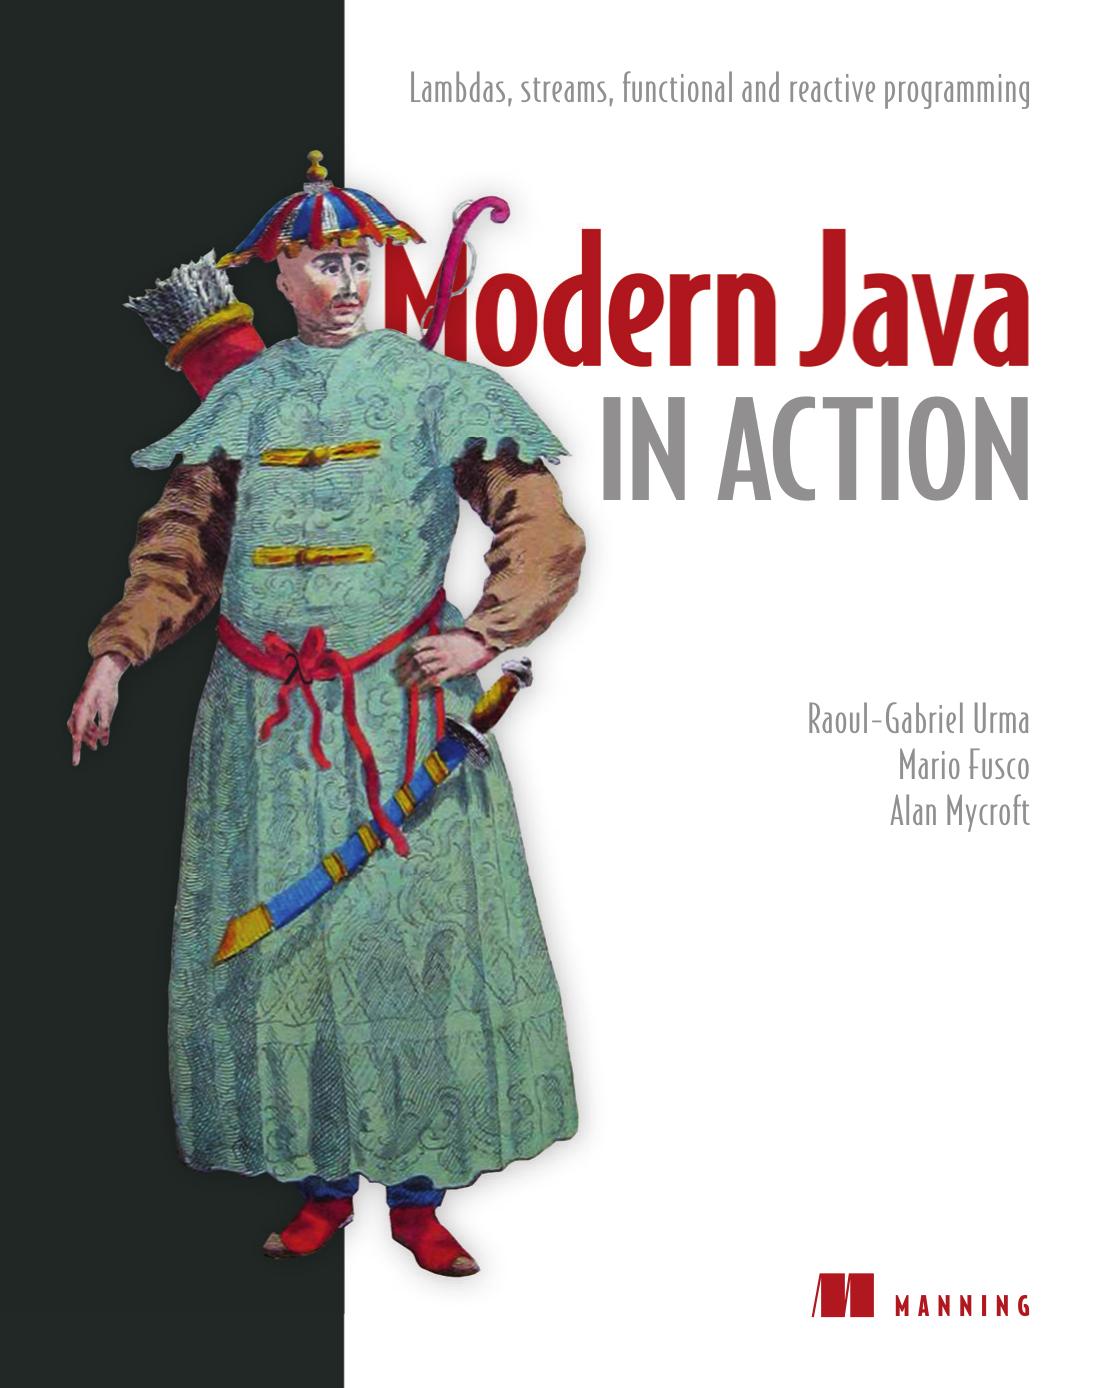 Modern Java in Action: Lambdas, Streams, Functional and Reactive Programming